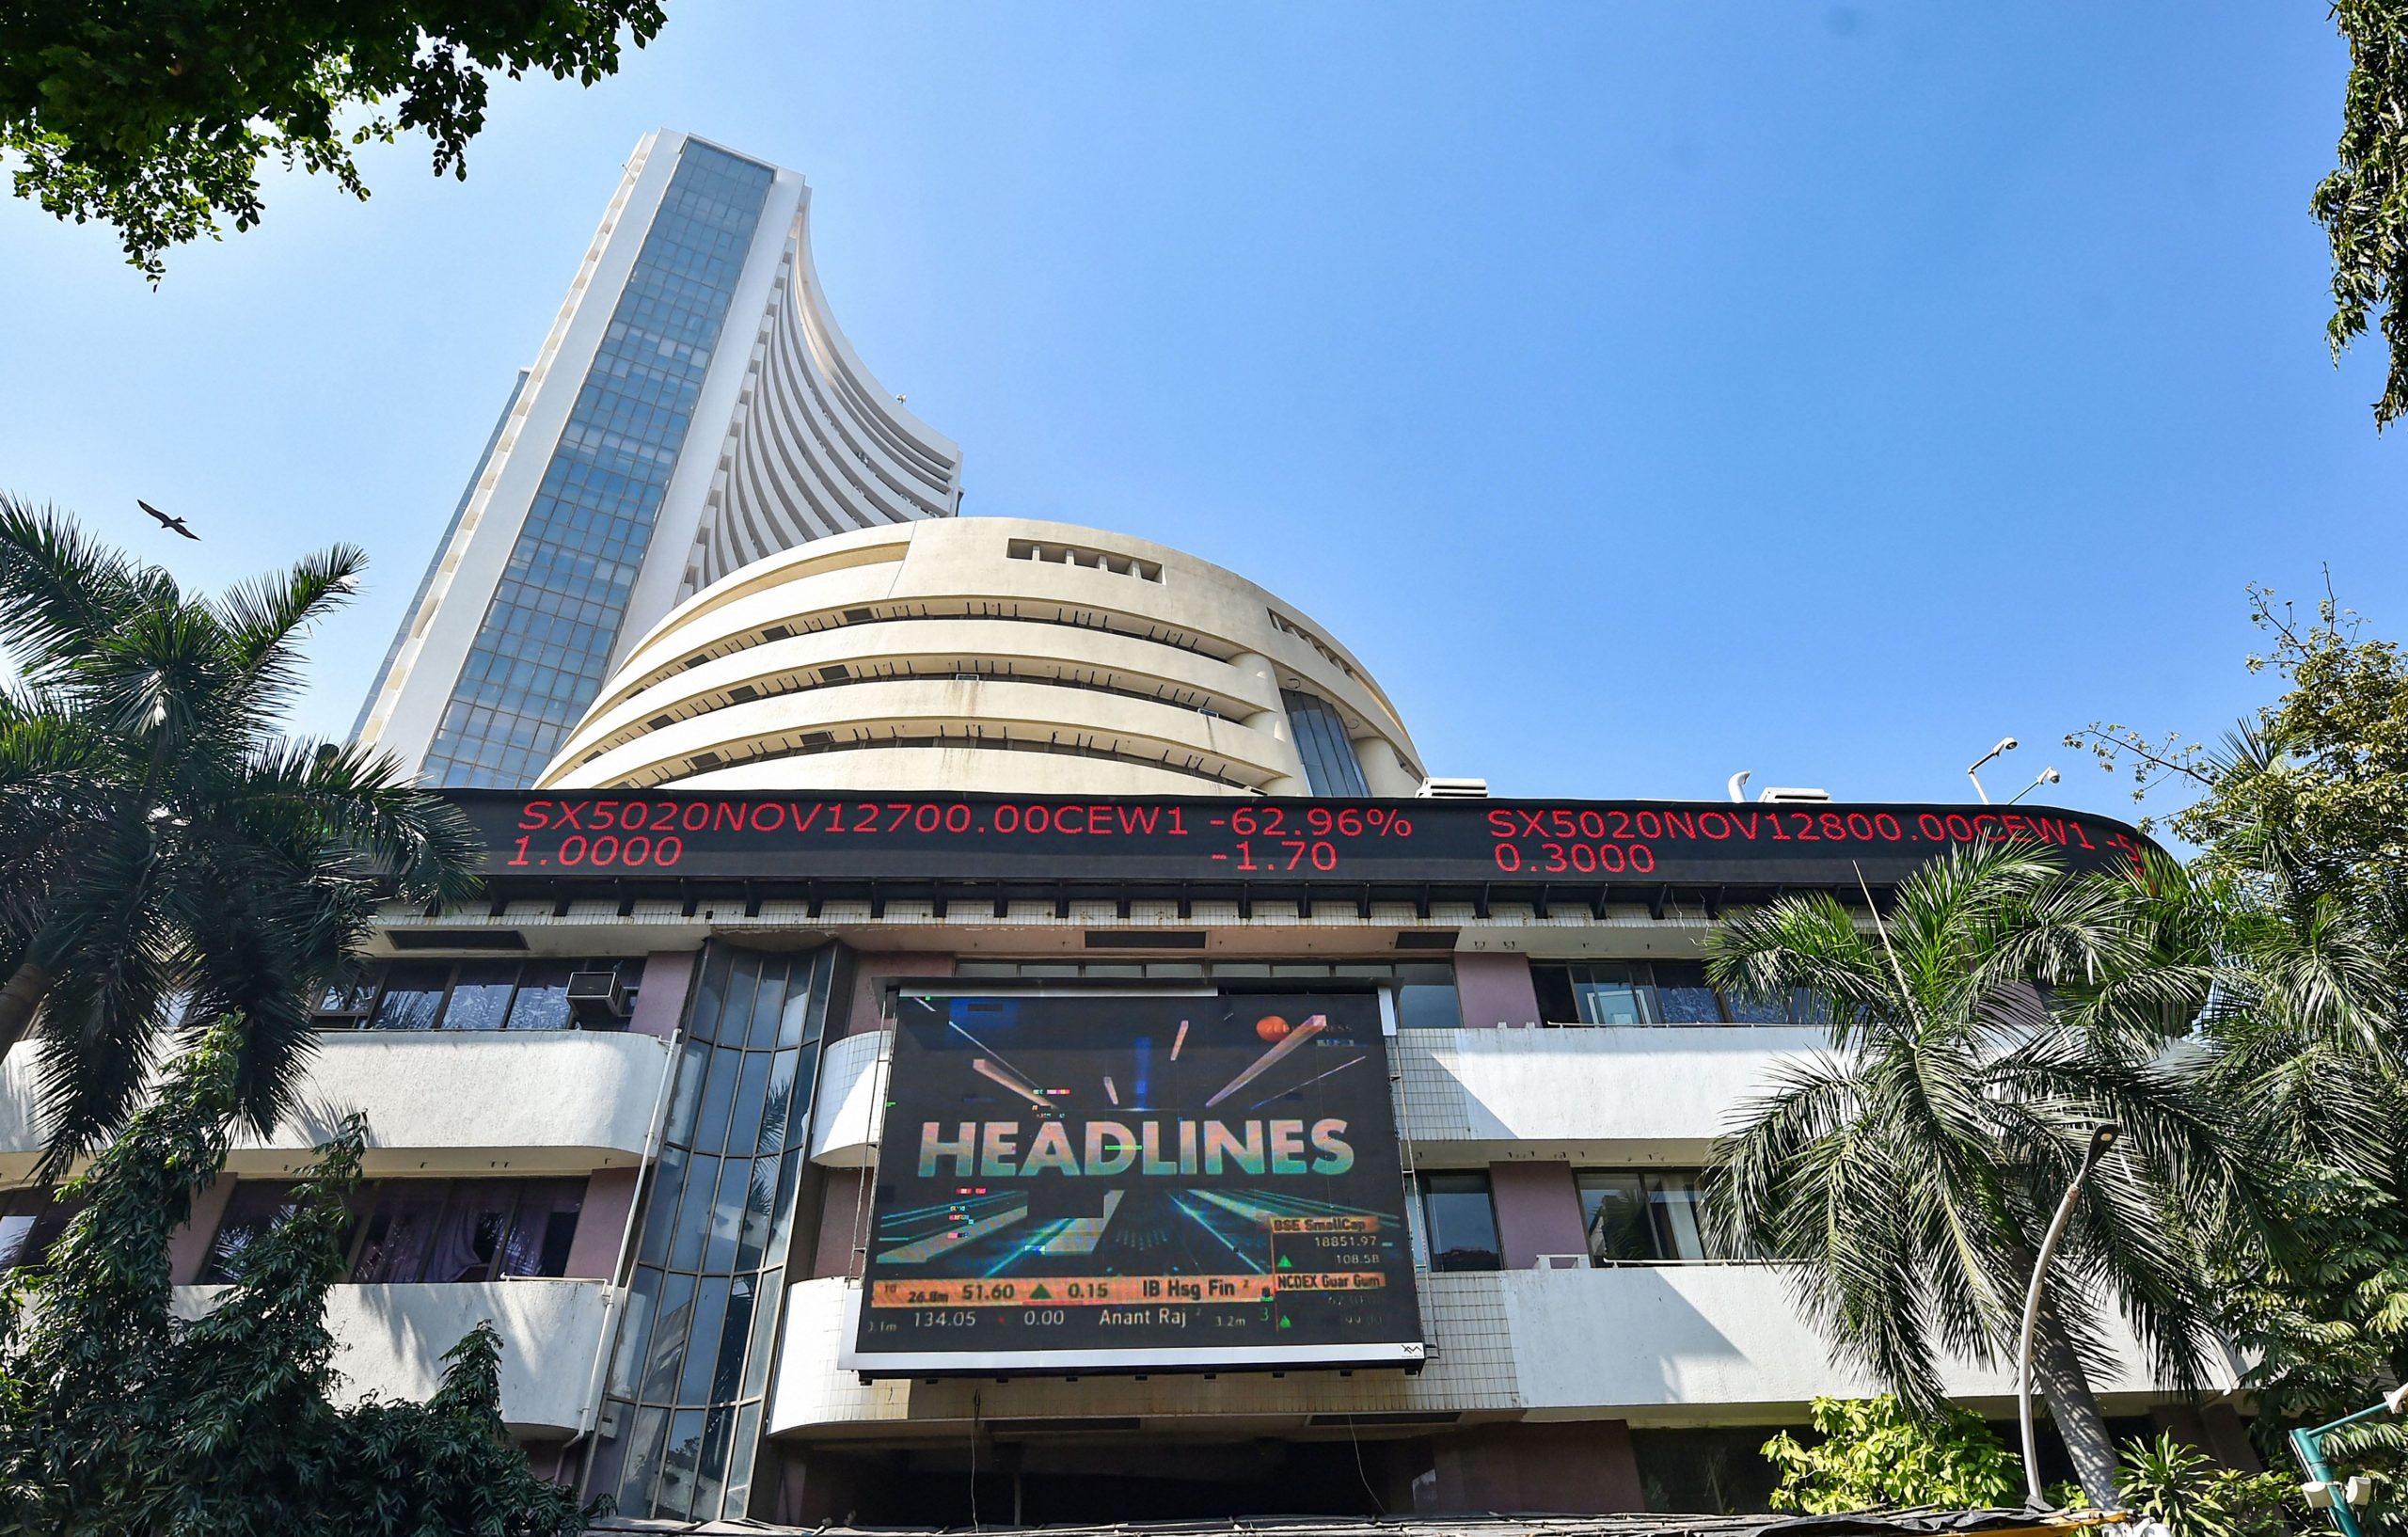 Sensex tanks over 400 points in early trade, Nifty drops below 14,750